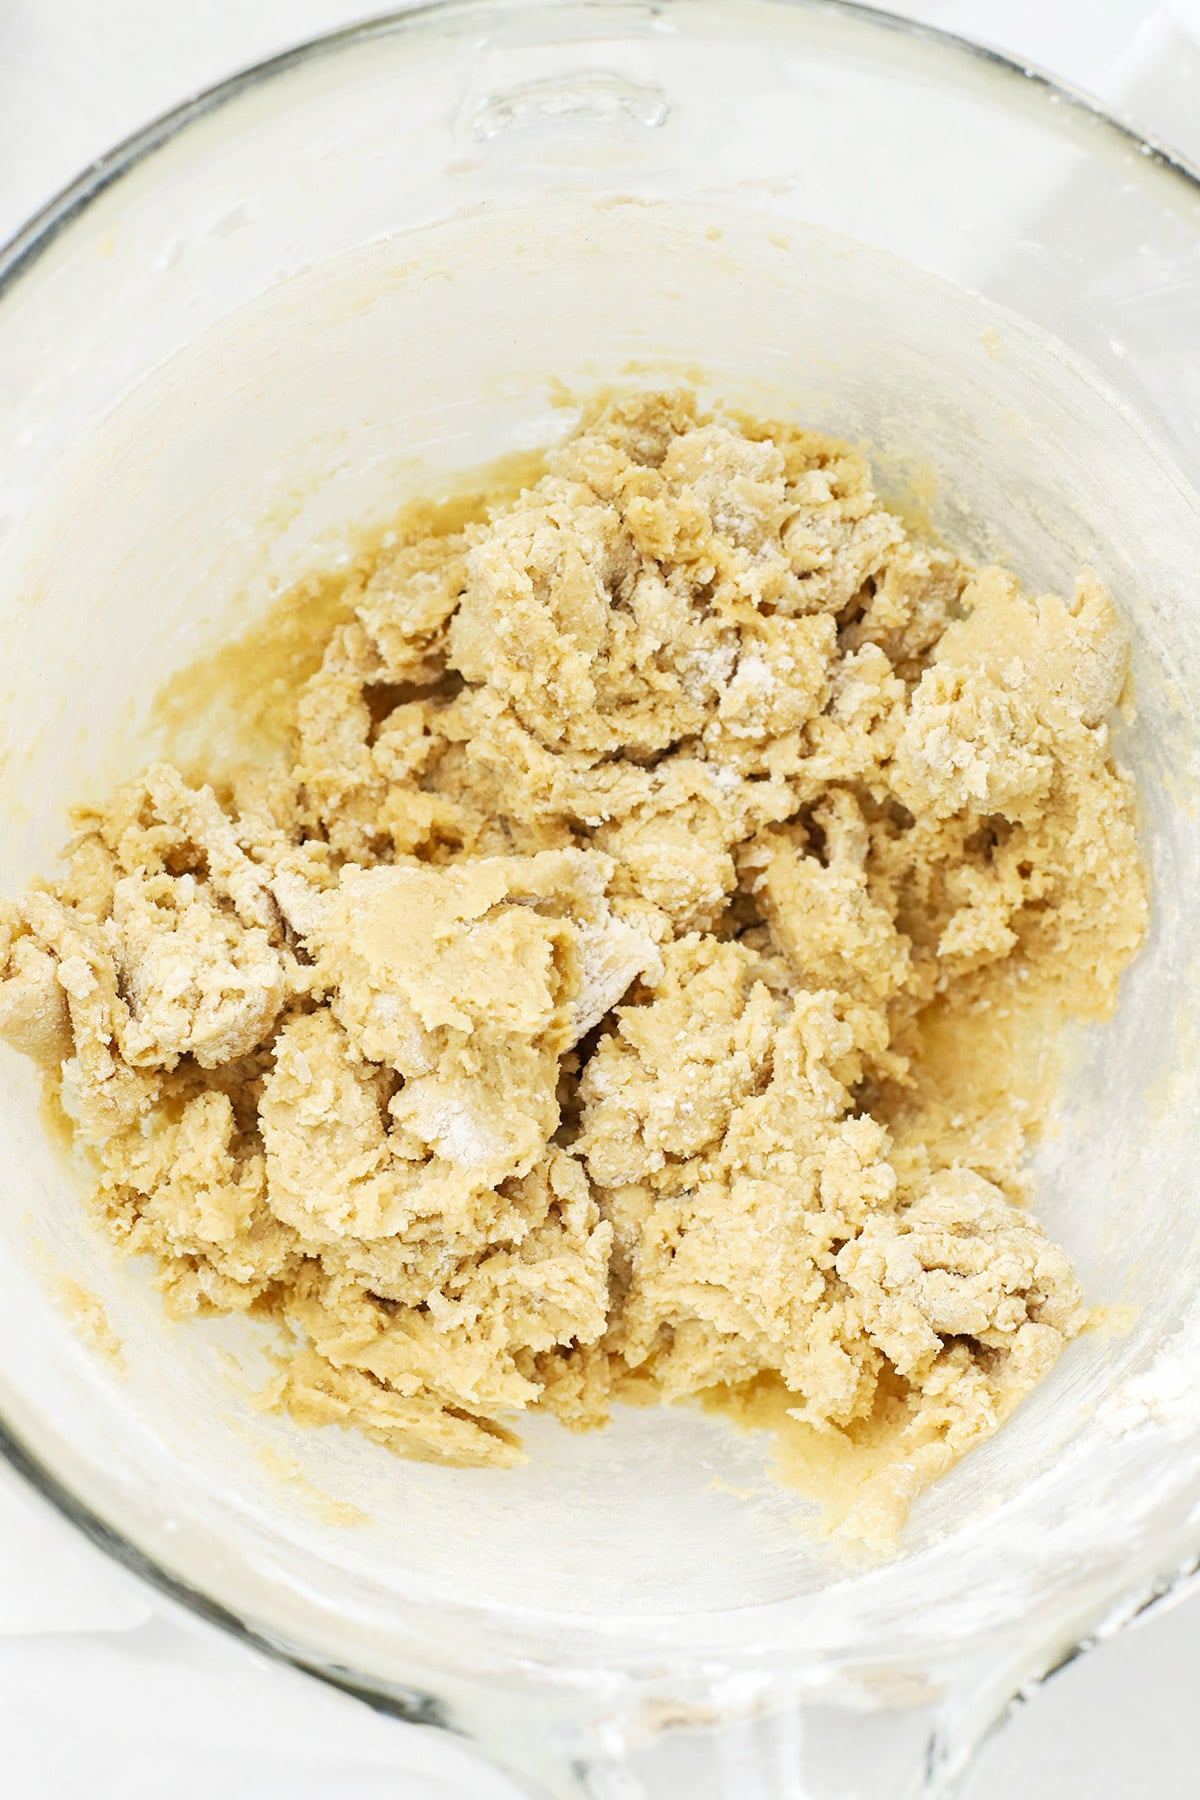 Mixing dry ingredients into thick gluten-free chocolate chip cookie dough